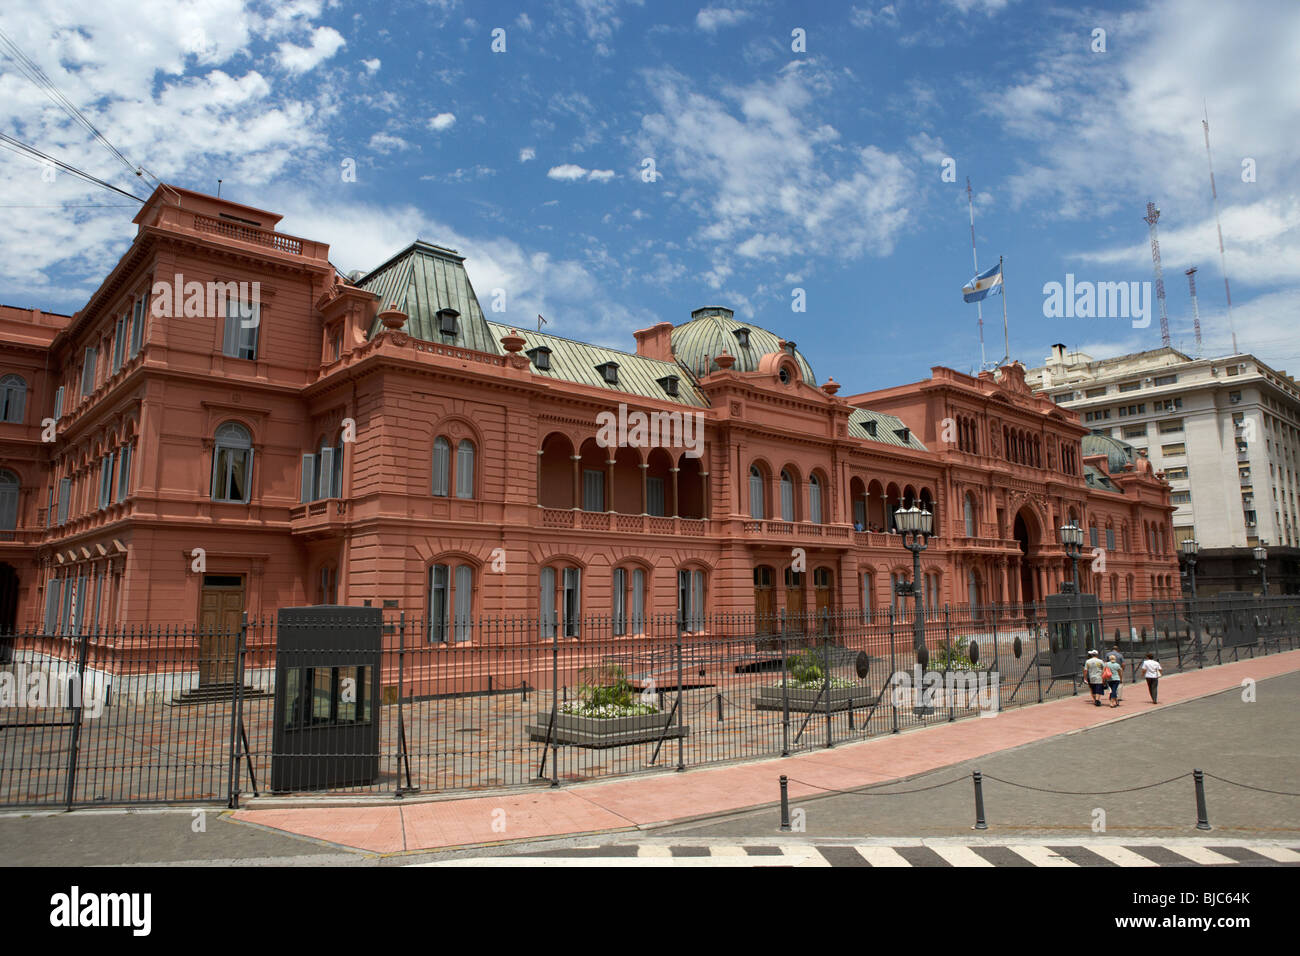 italianate portico of the casa rosada the pink house official seat of the executive branch of the government of argentina Stock Photo